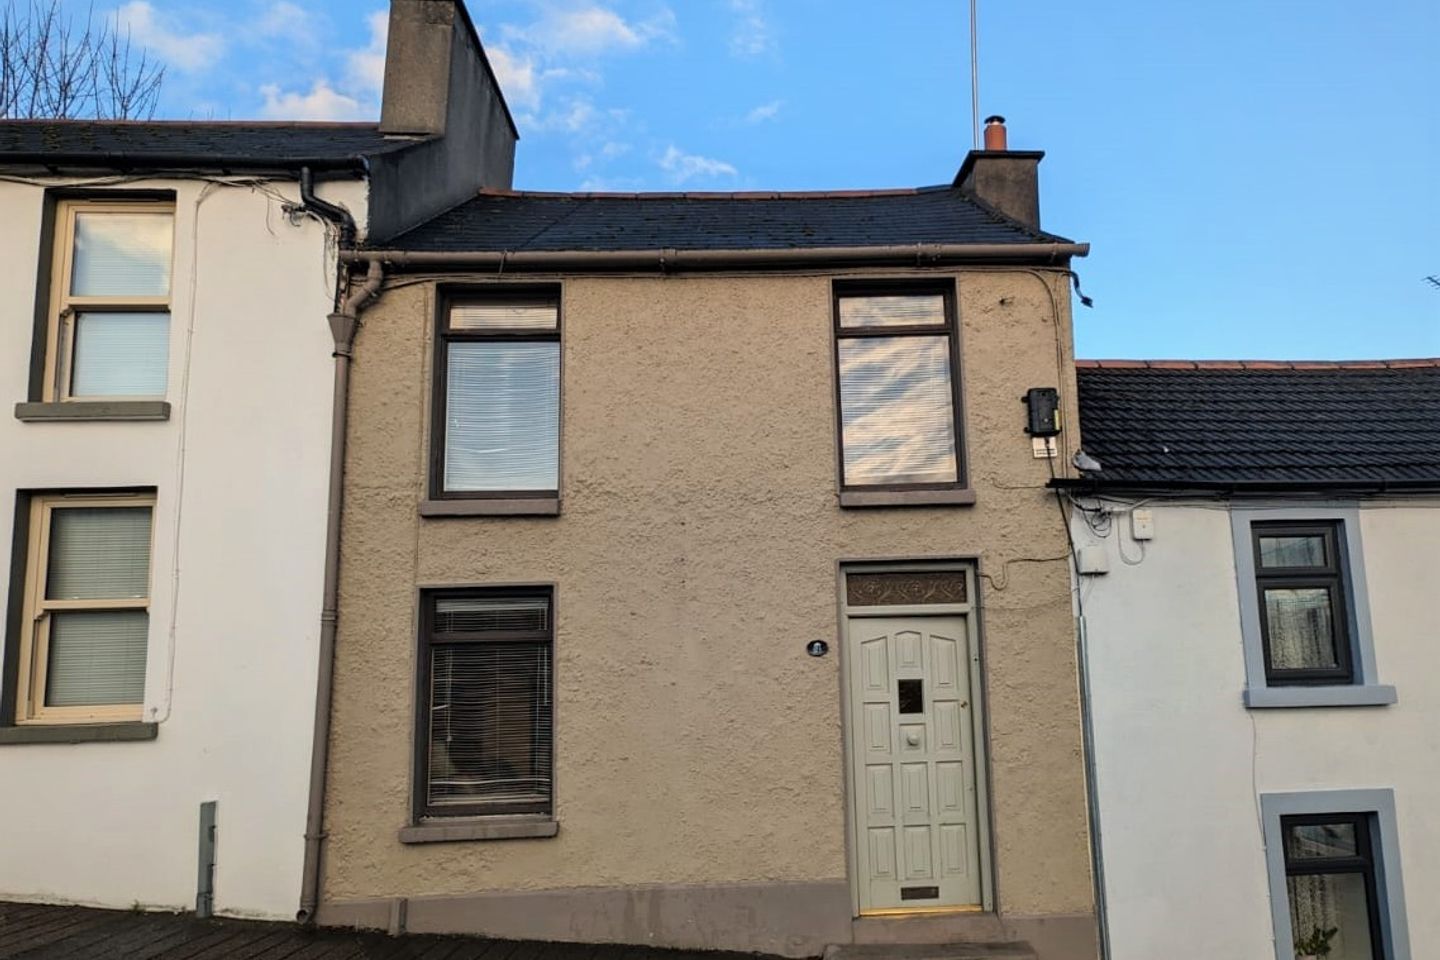 21 Convent Hill, Waterford City, Co. Waterford, X91RHD7